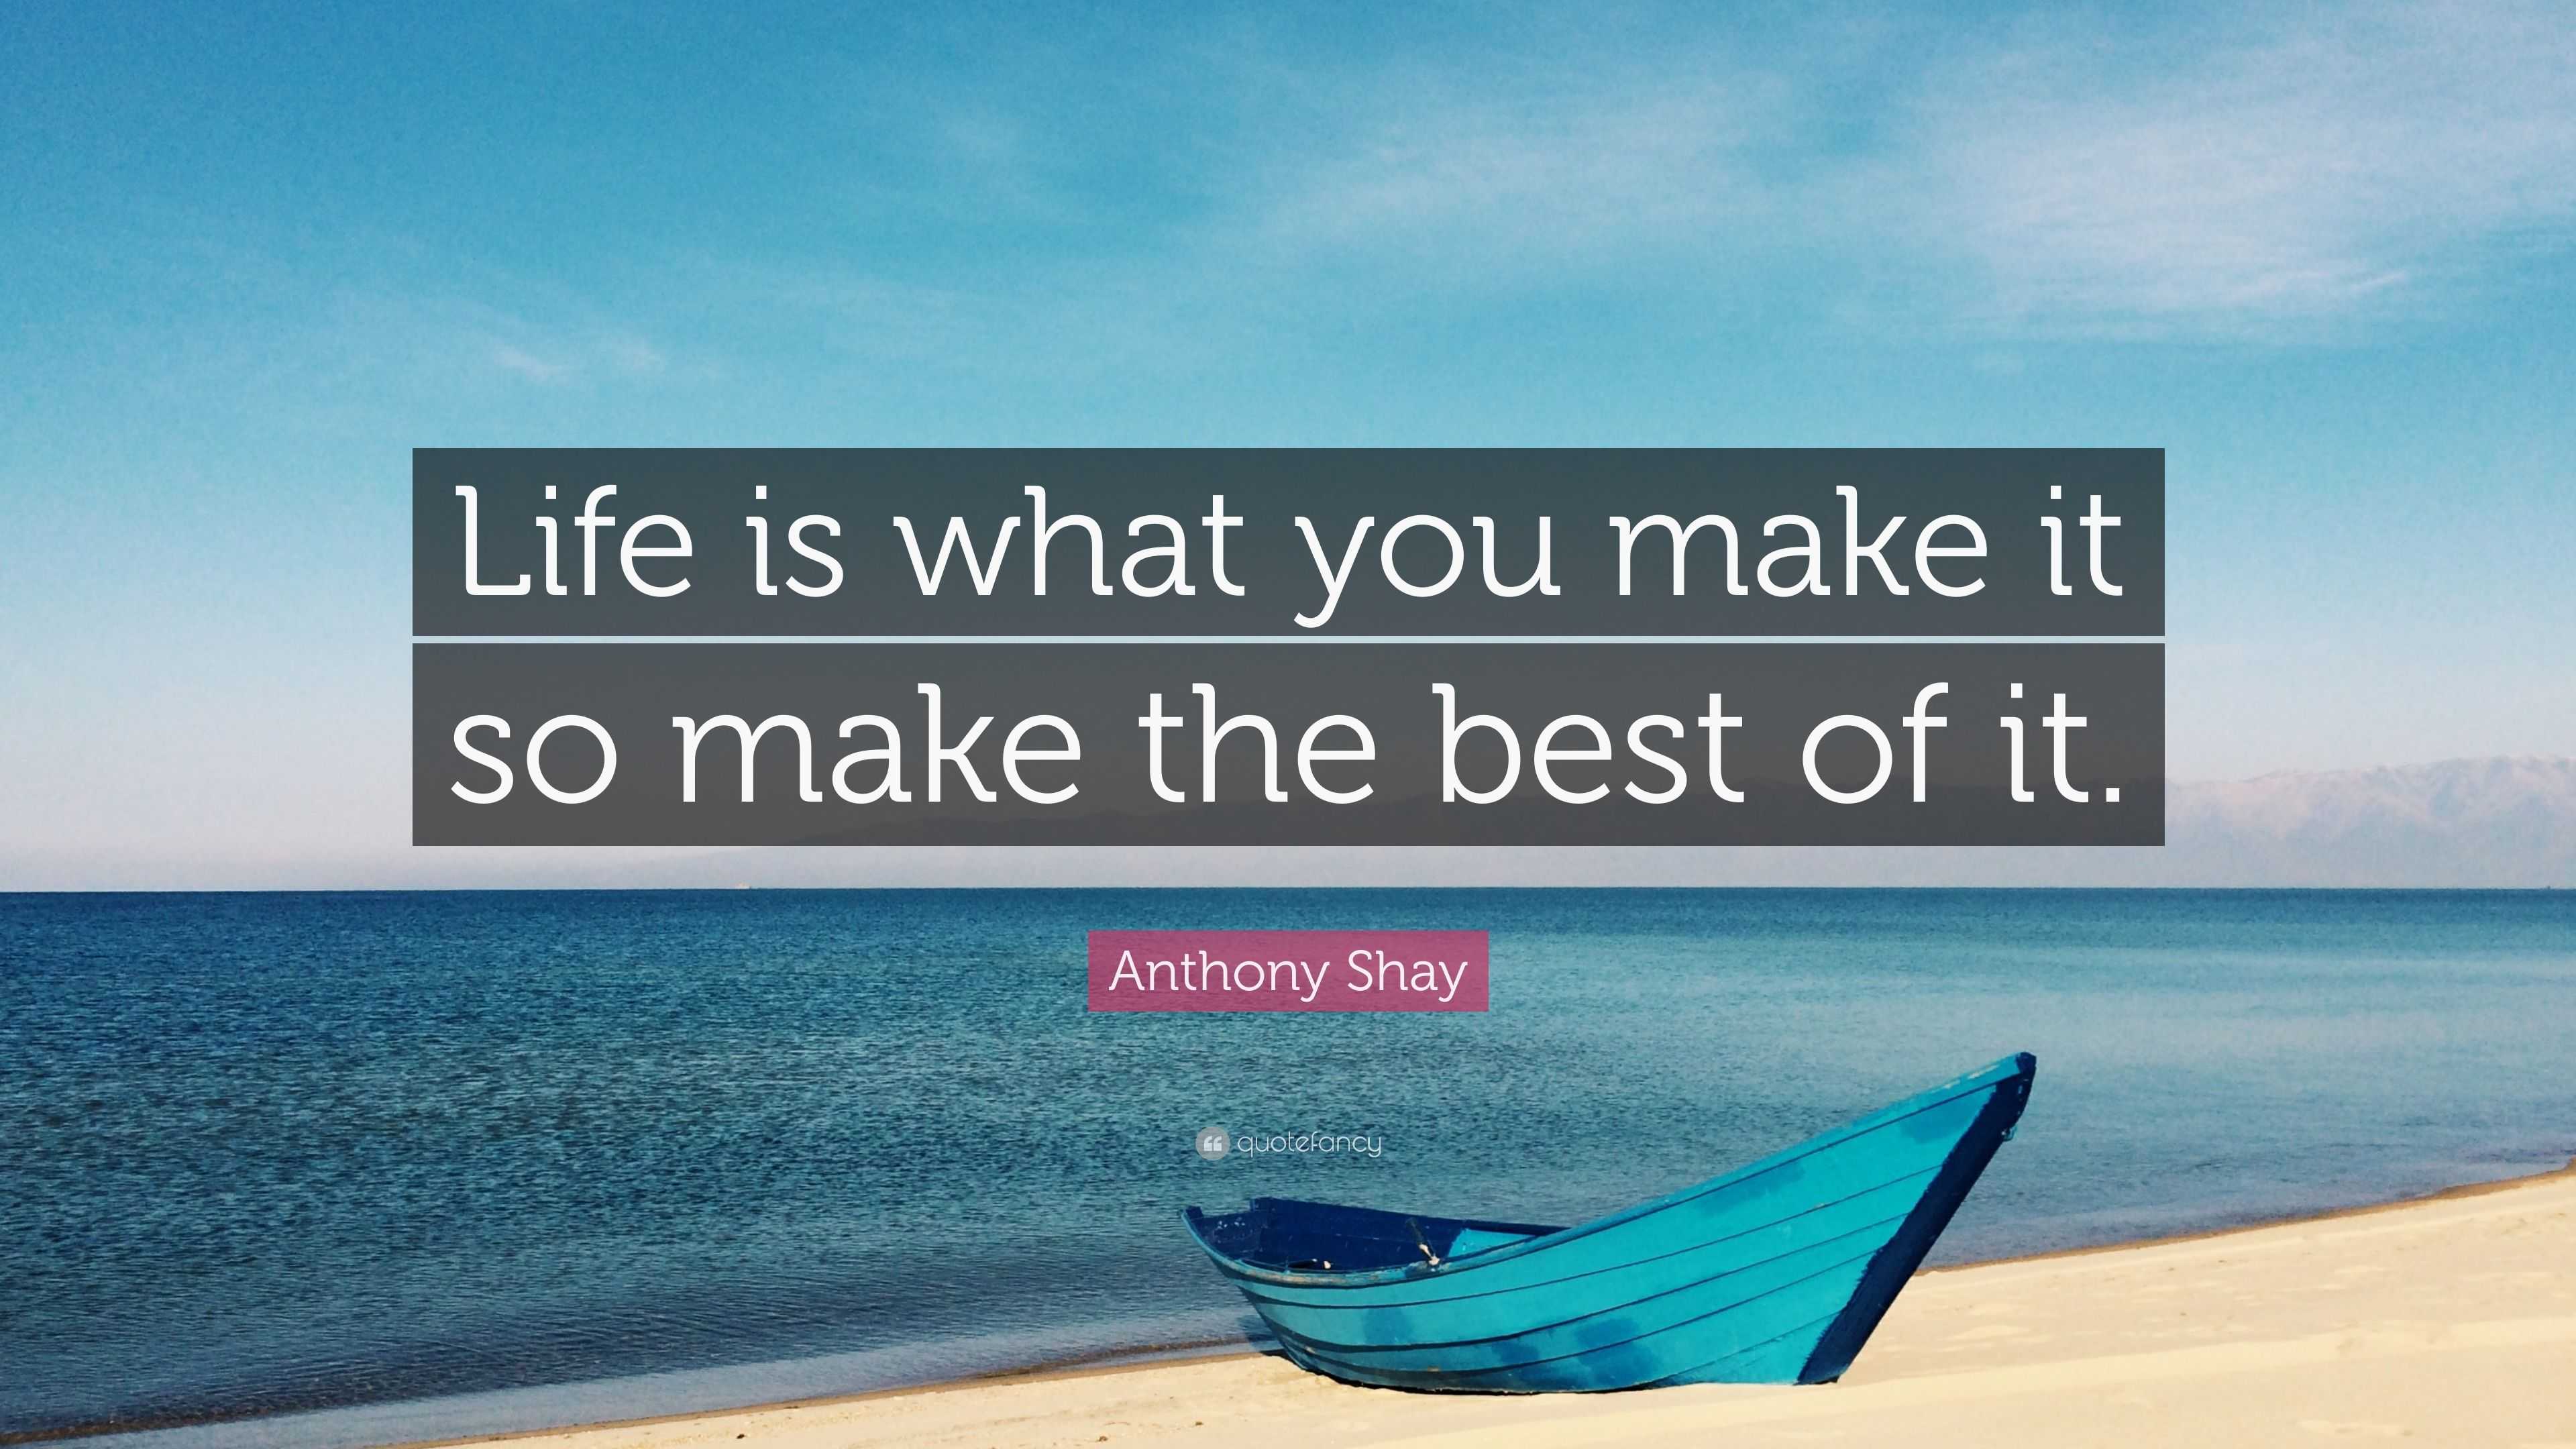 Anthony Shay Quote: “Life is what you make it so make the best of it.”